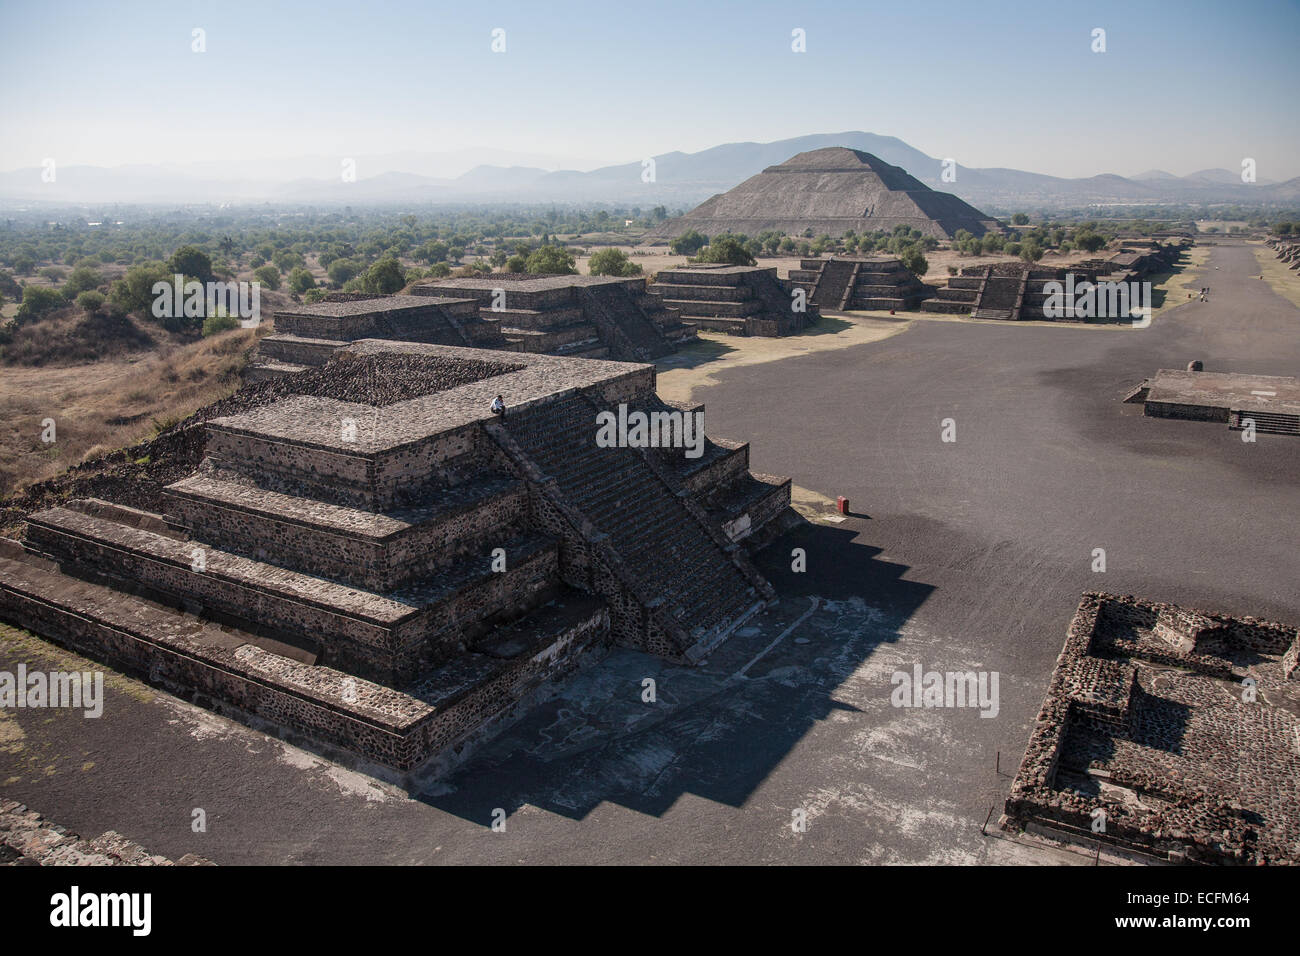 Plaza of the moon and the Pyramid of the Sun in Teotihuacan, Mexico Stock Photo